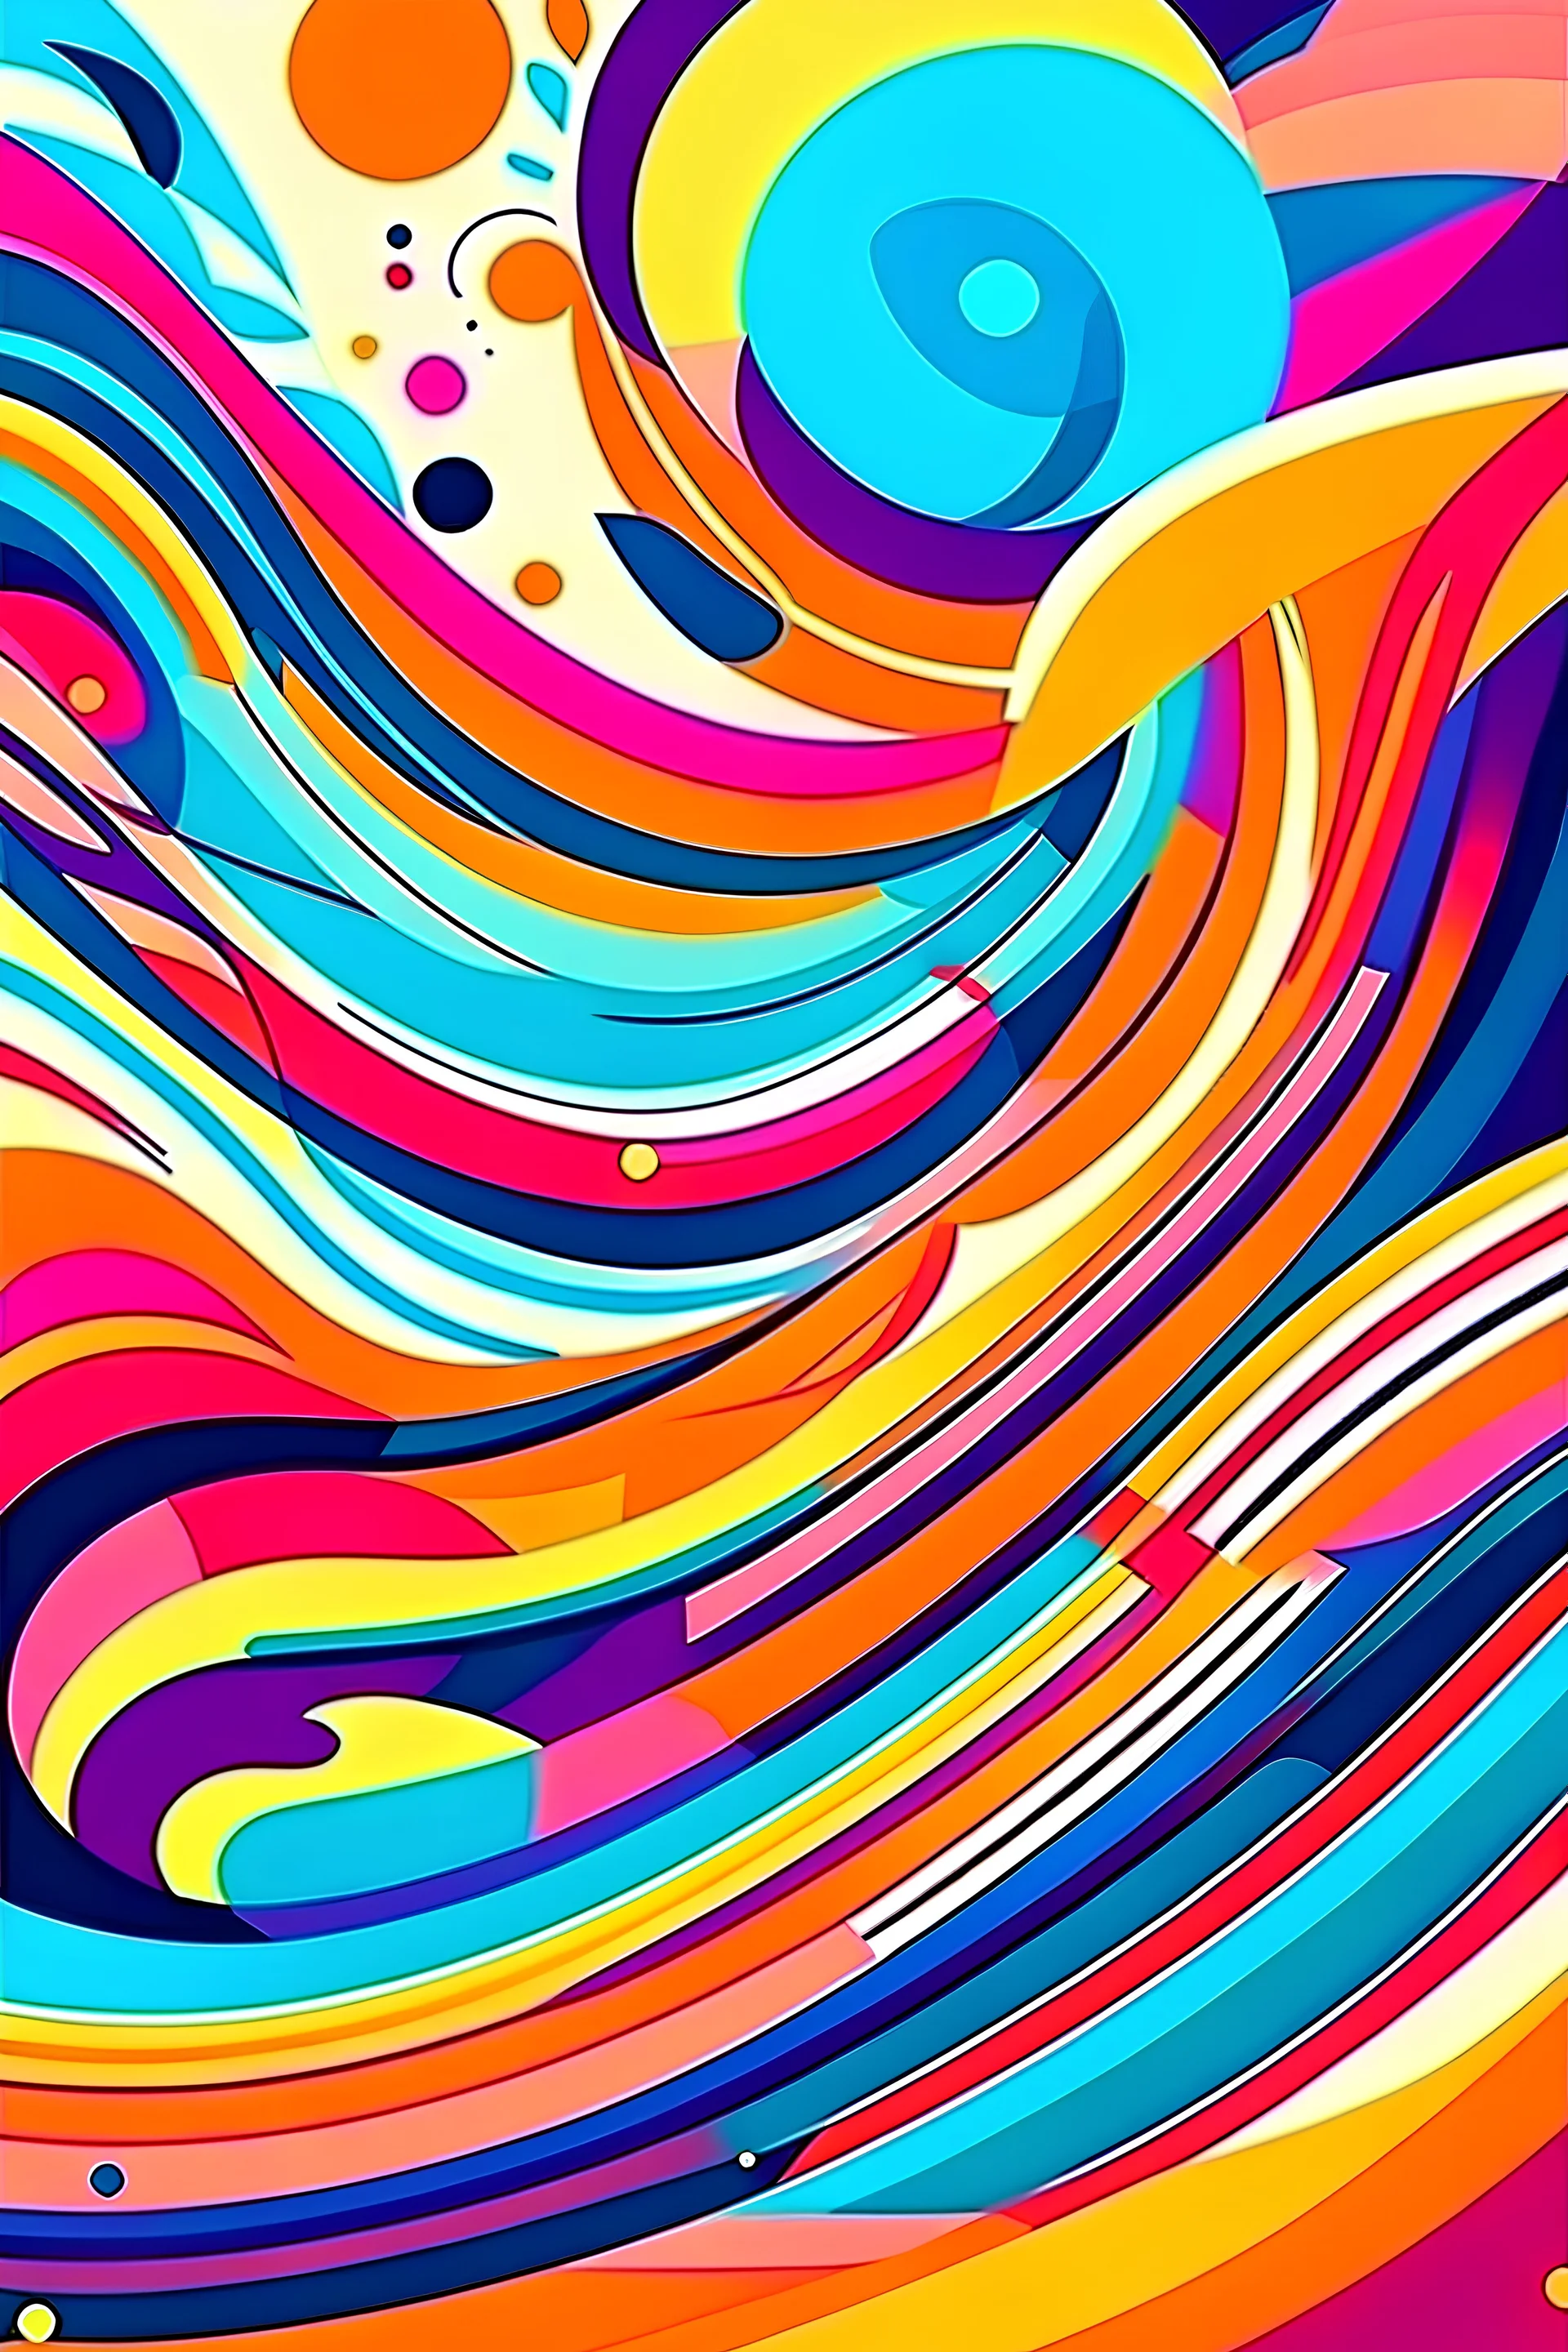 background with bright colors, dynamic shapes and abstract patterns